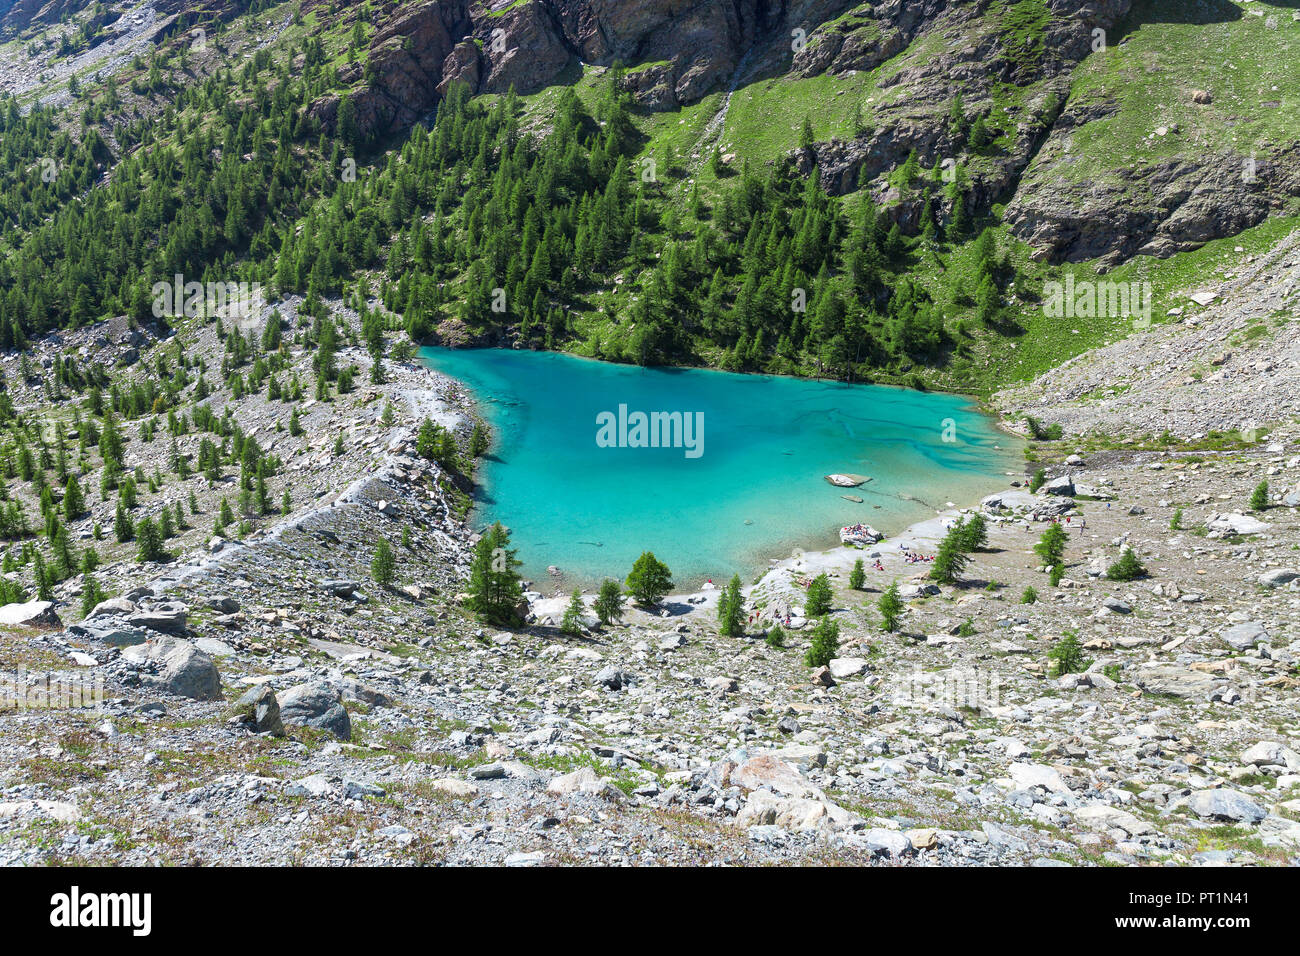 The Green Water Of The Blu Lake At The Foot Of Monte Rosa Massif In Ayas Valley Champoluc Ayas Valley Aosta Province Aosta Valley Italy Europe Stock Photo Alamy